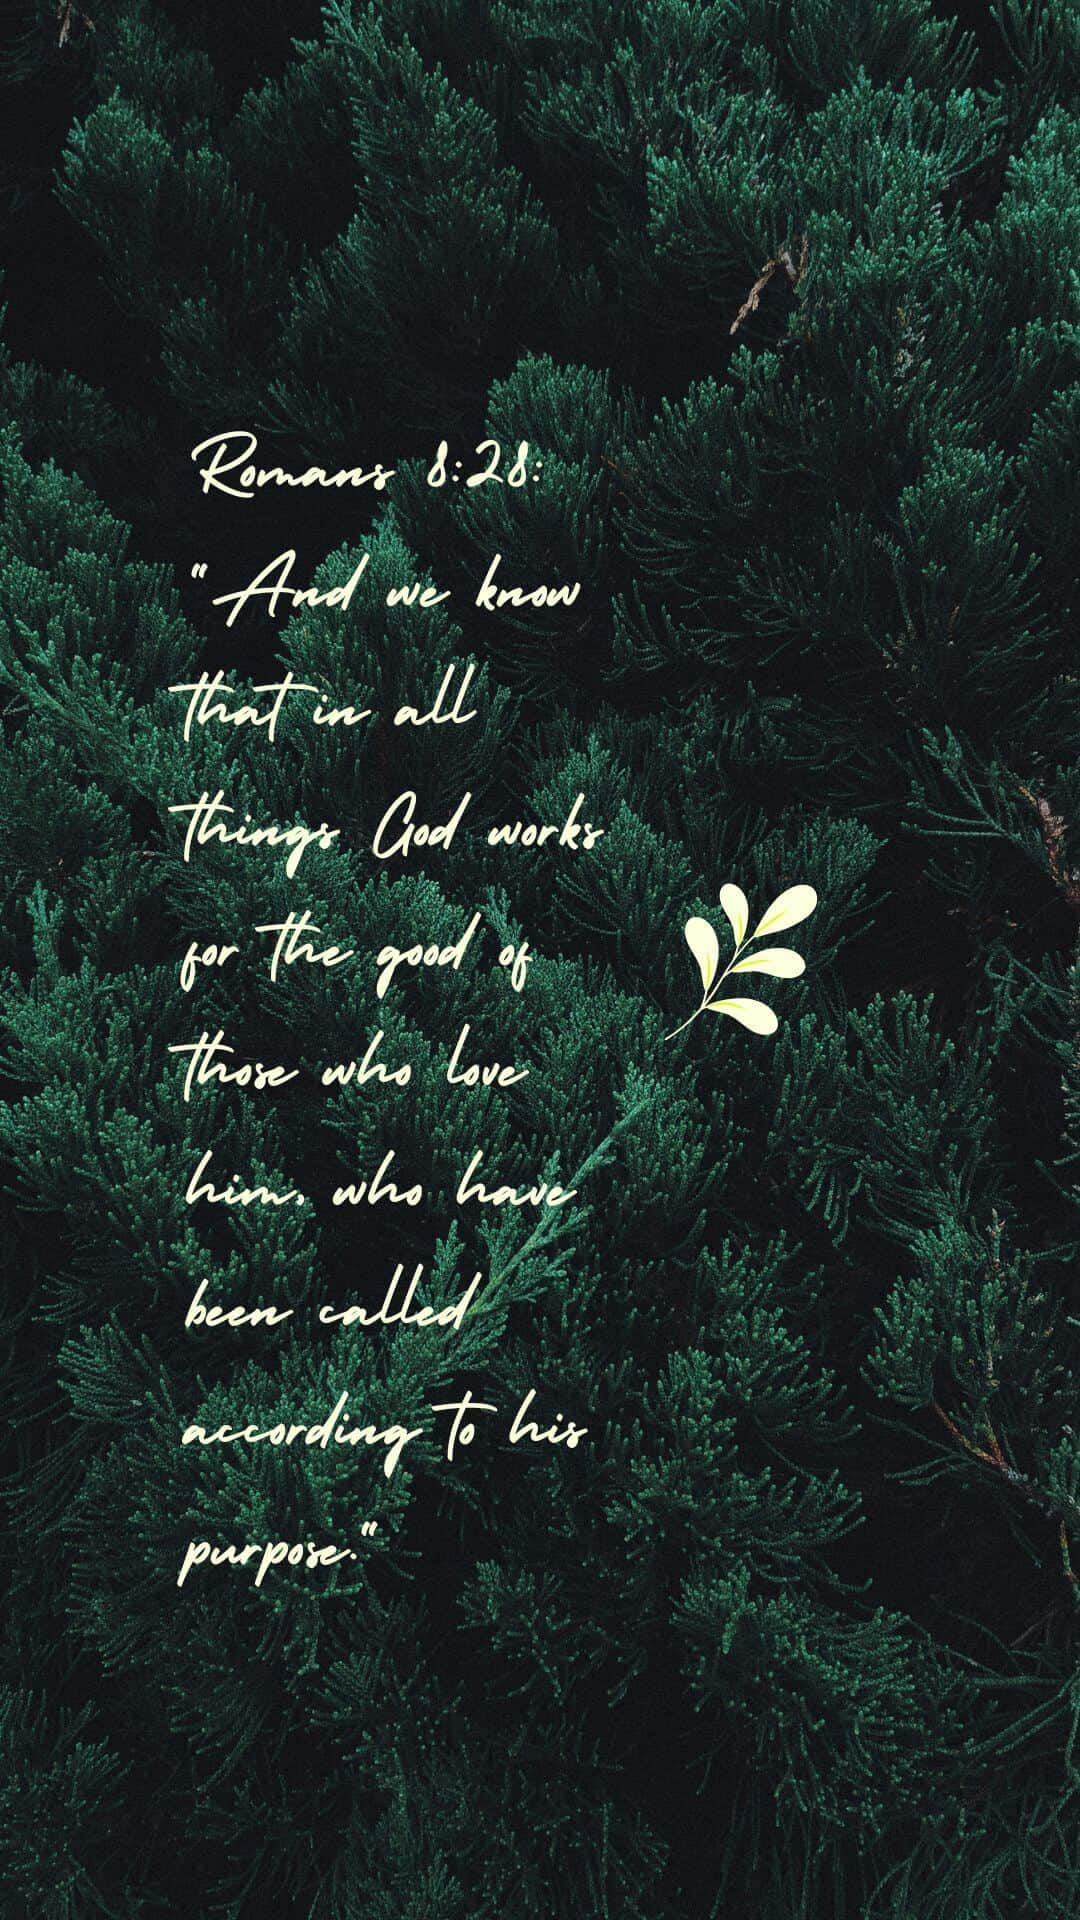 Bible verse wallpaper for mobile phone. Romans 8:28. And we know that in all things God works for the good of those who love him, who have been called according to his purpose. - Christian